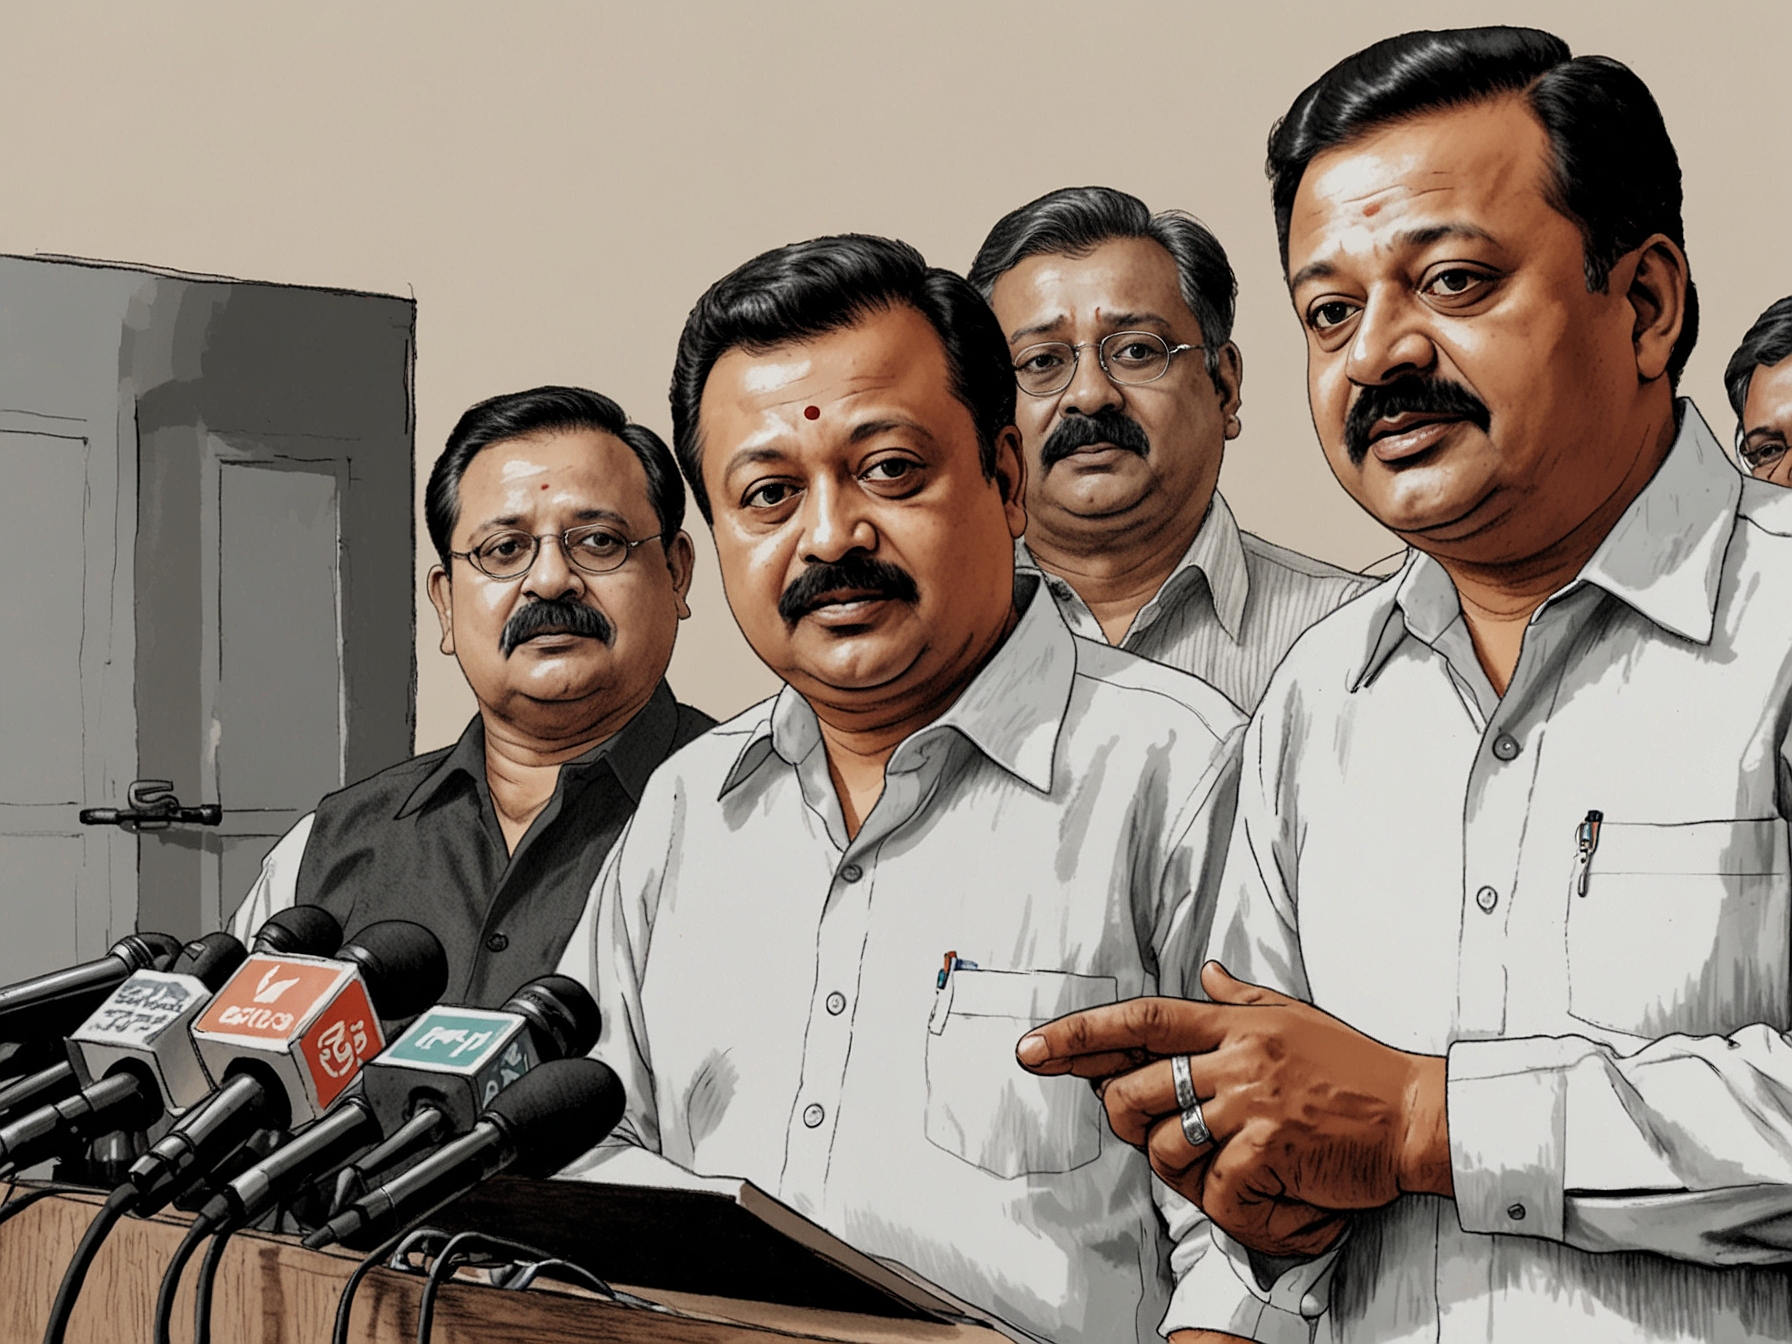 Union Minister Suresh Gopi addressing the media, emphasizing his clarification regarding Indira Gandhi's legacy while retracting his 'mother' of India statement amidst political scrutiny.